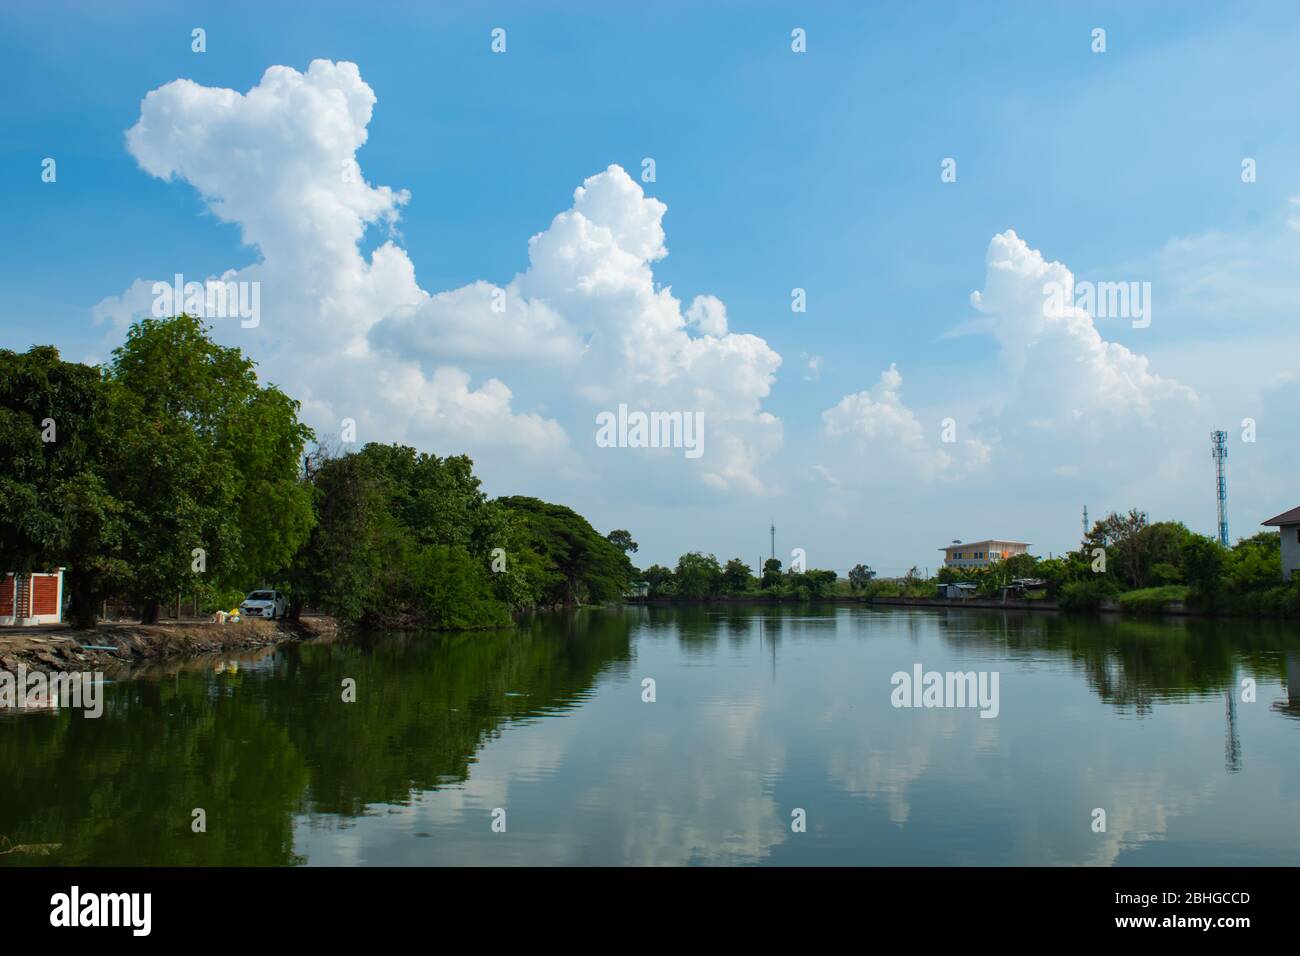 The beauty of the sky that reflects the water. Stock Photo